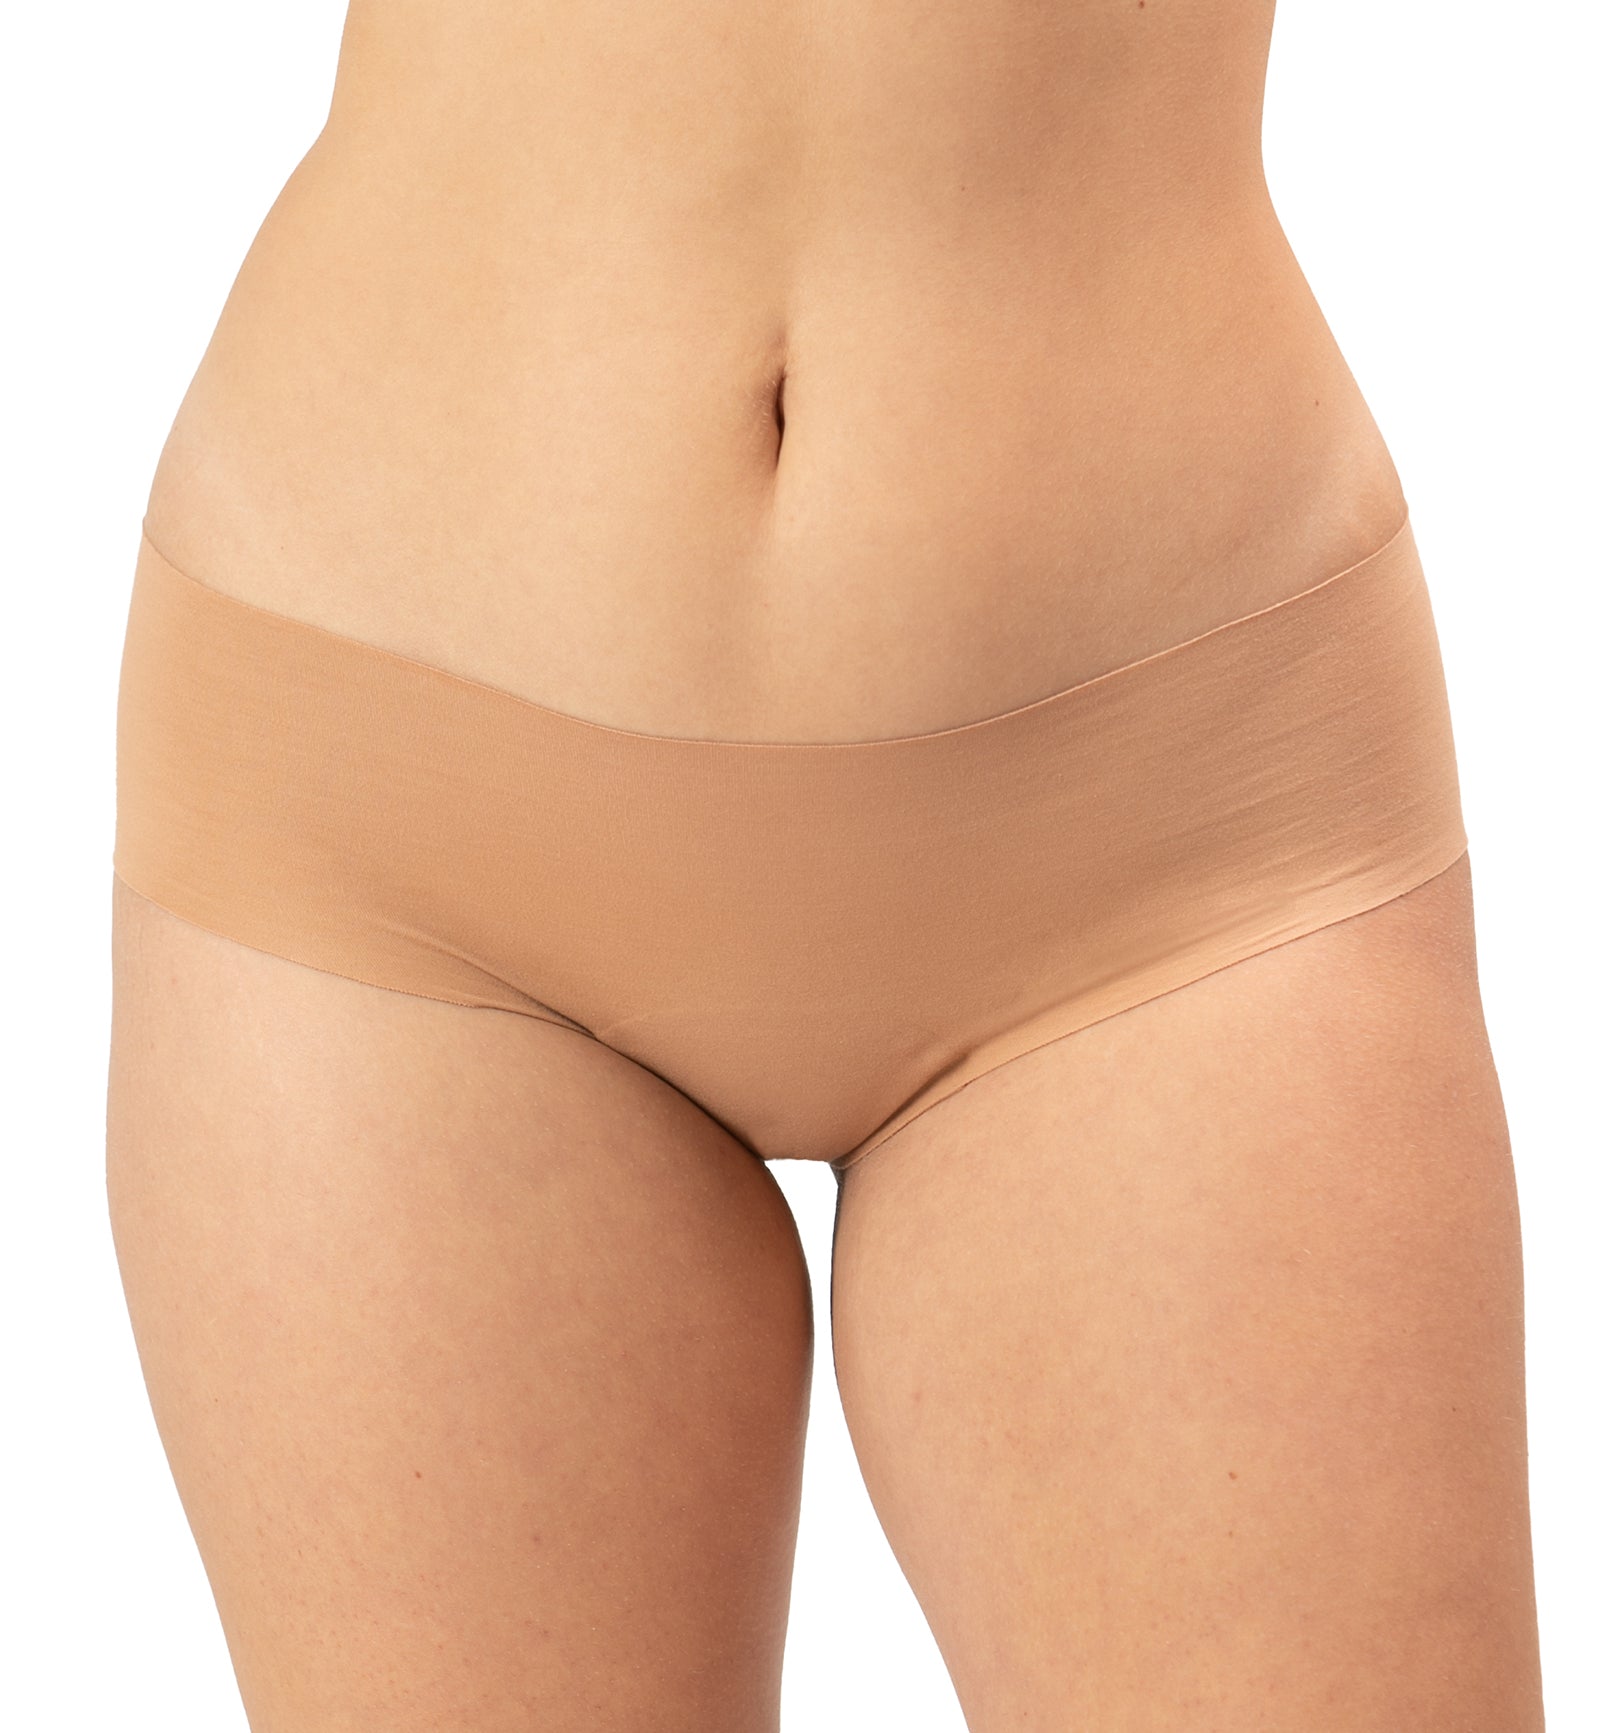 Panty Promise Low Rise Hipster,XS,Sand - Sand,XS